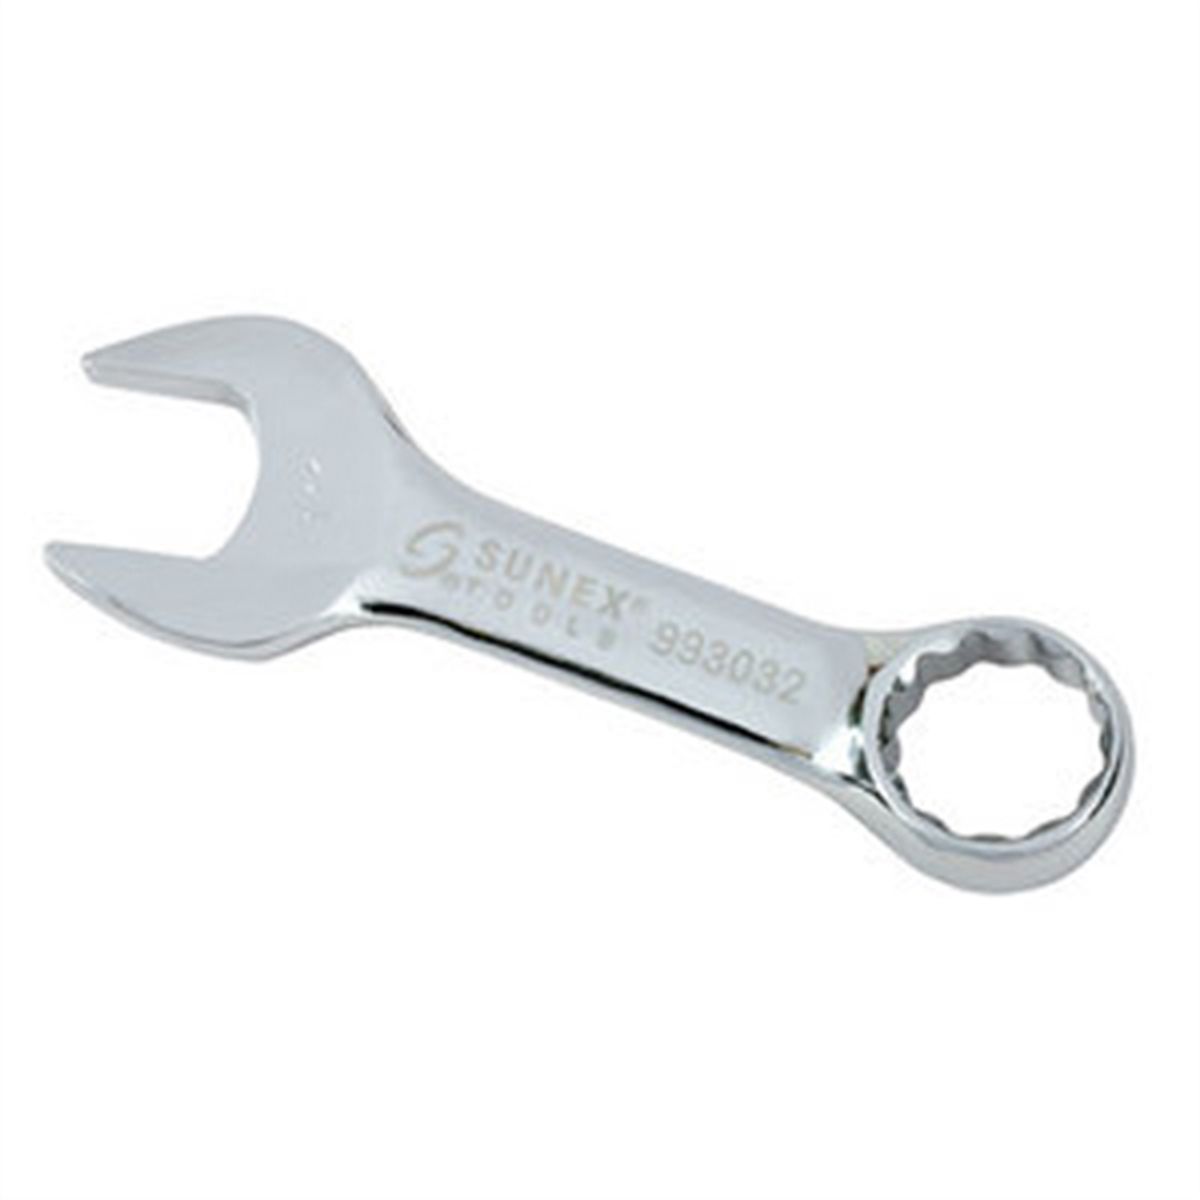 V8 Tools 11/16" Stubby Combination Wrench